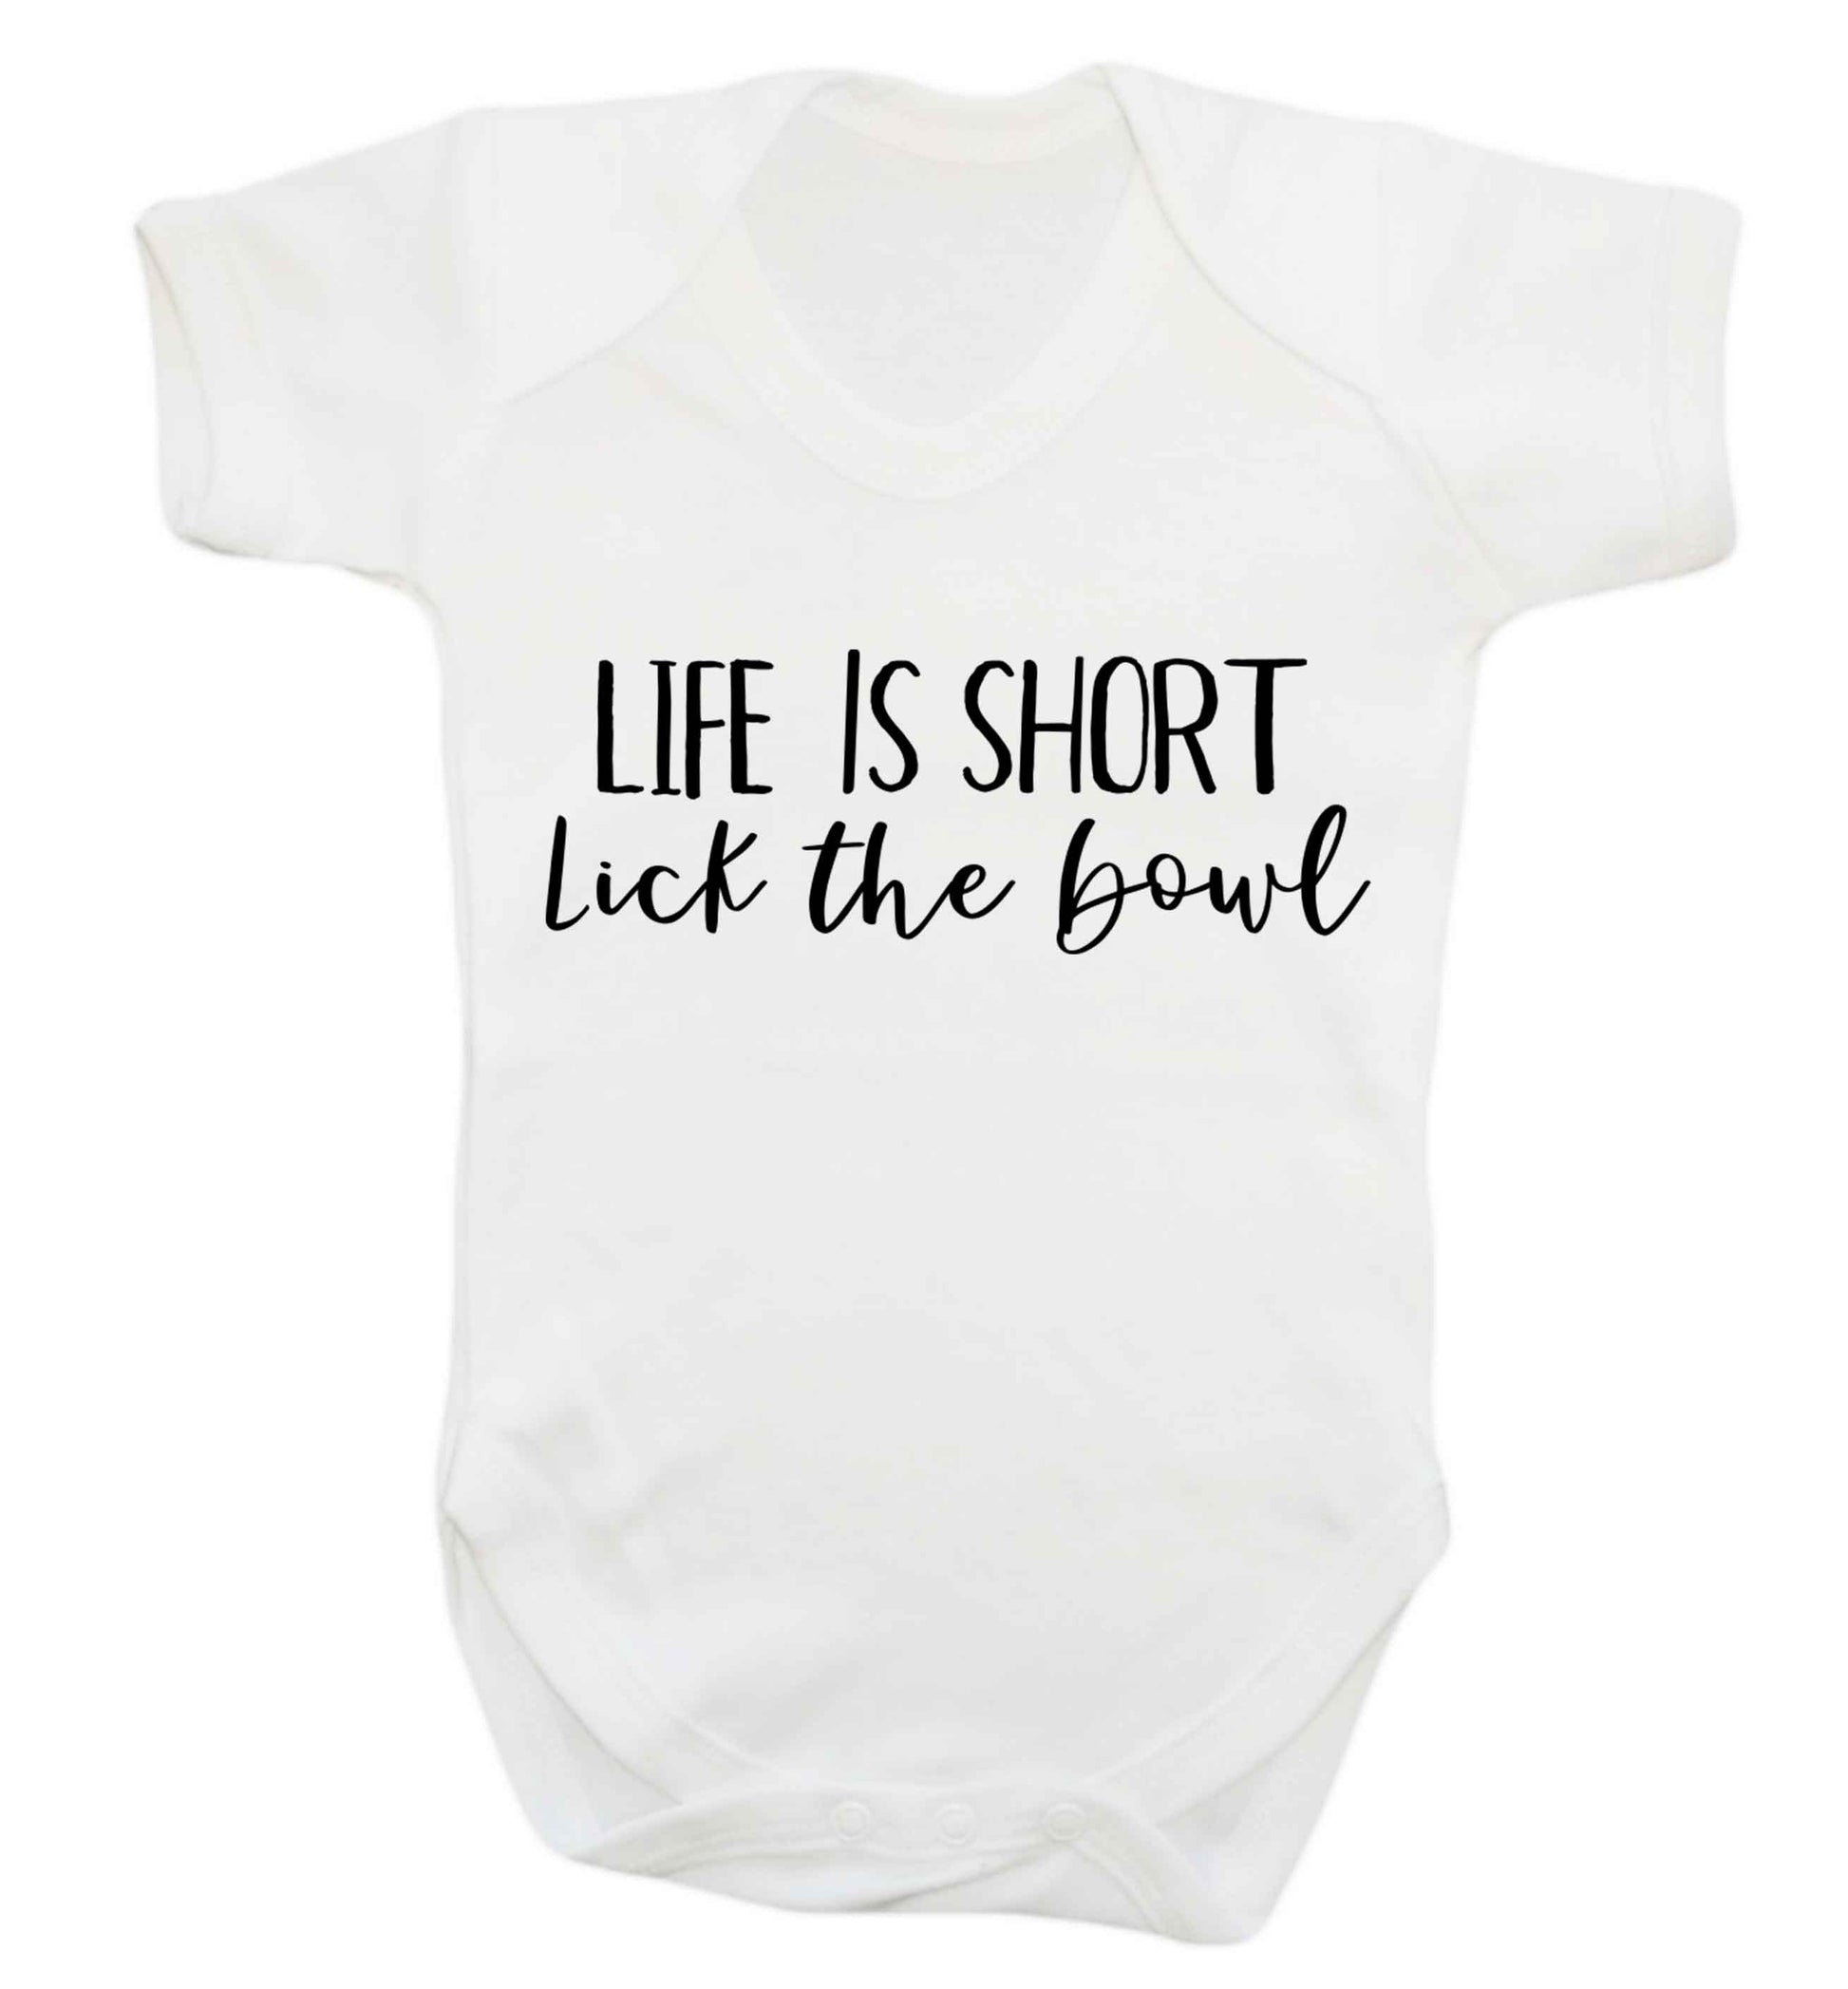 Life is short lick the bowl Baby Vest white 18-24 months